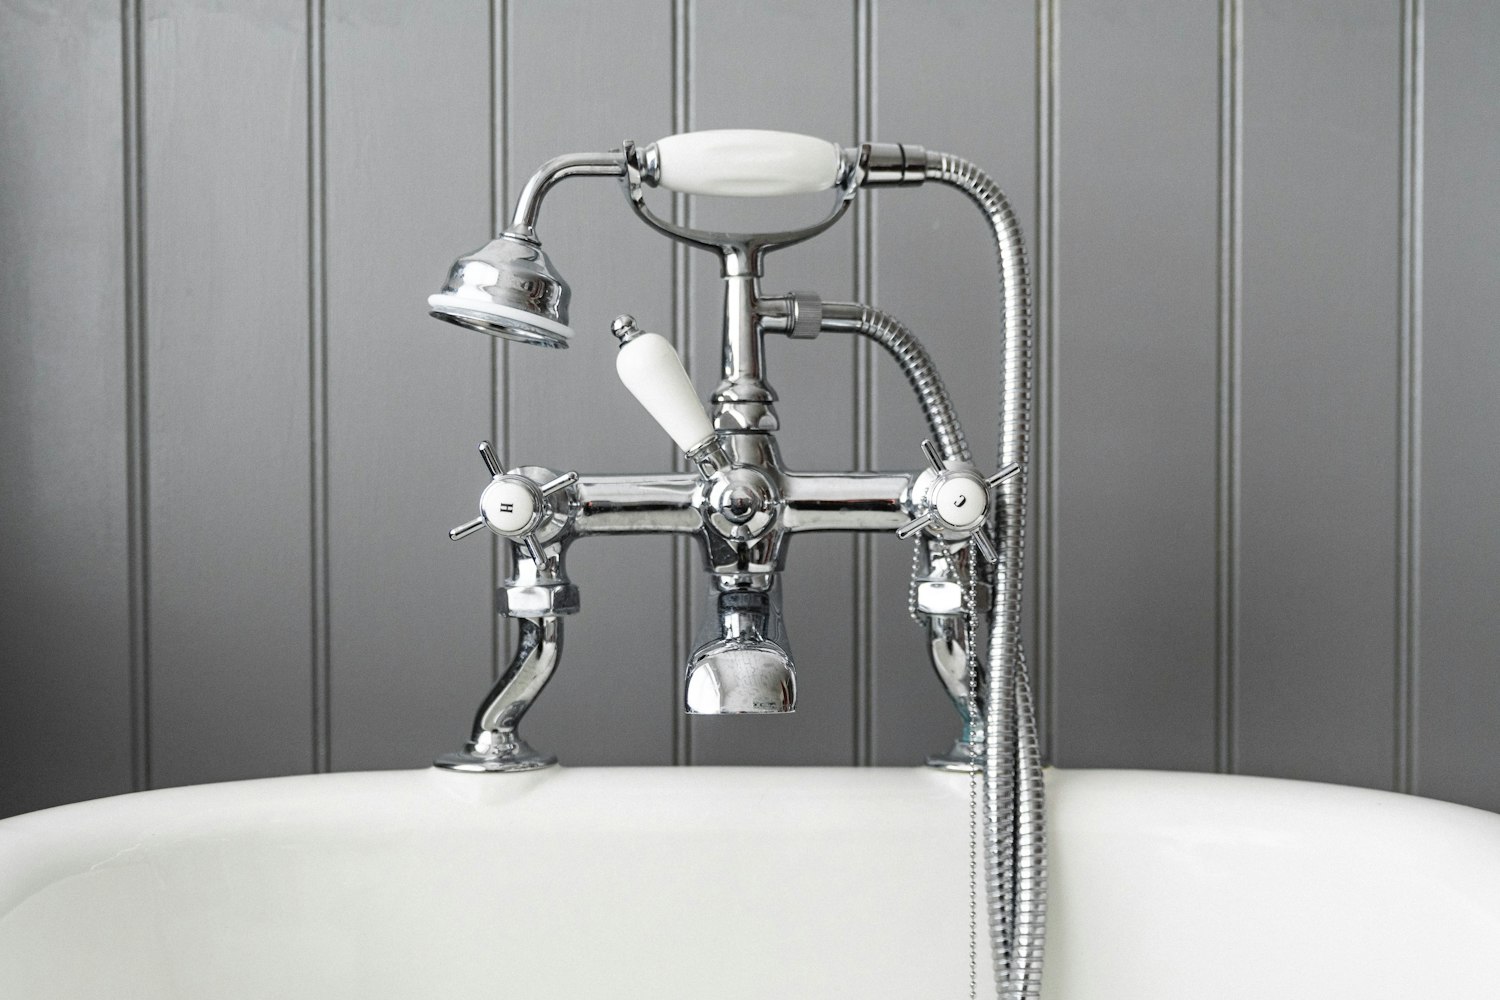 gray stainless steel bathtub faucet by Dan Smedley